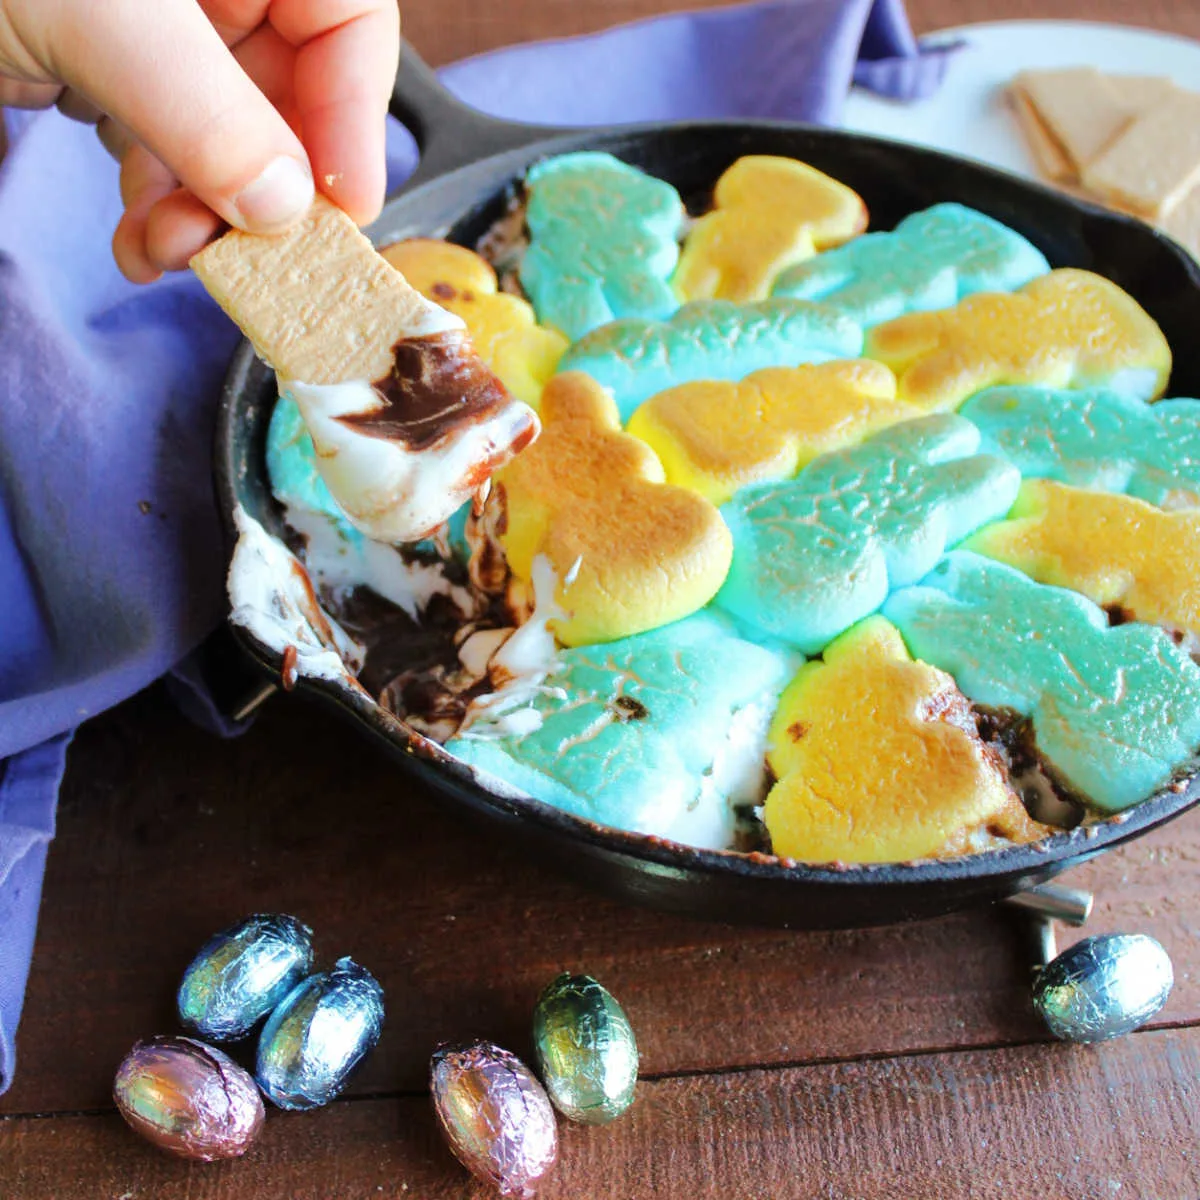 Child's hand holding piece of graham cracker dipped into smore dip with gooey melted Peeps on top of melted chocolate mixture.